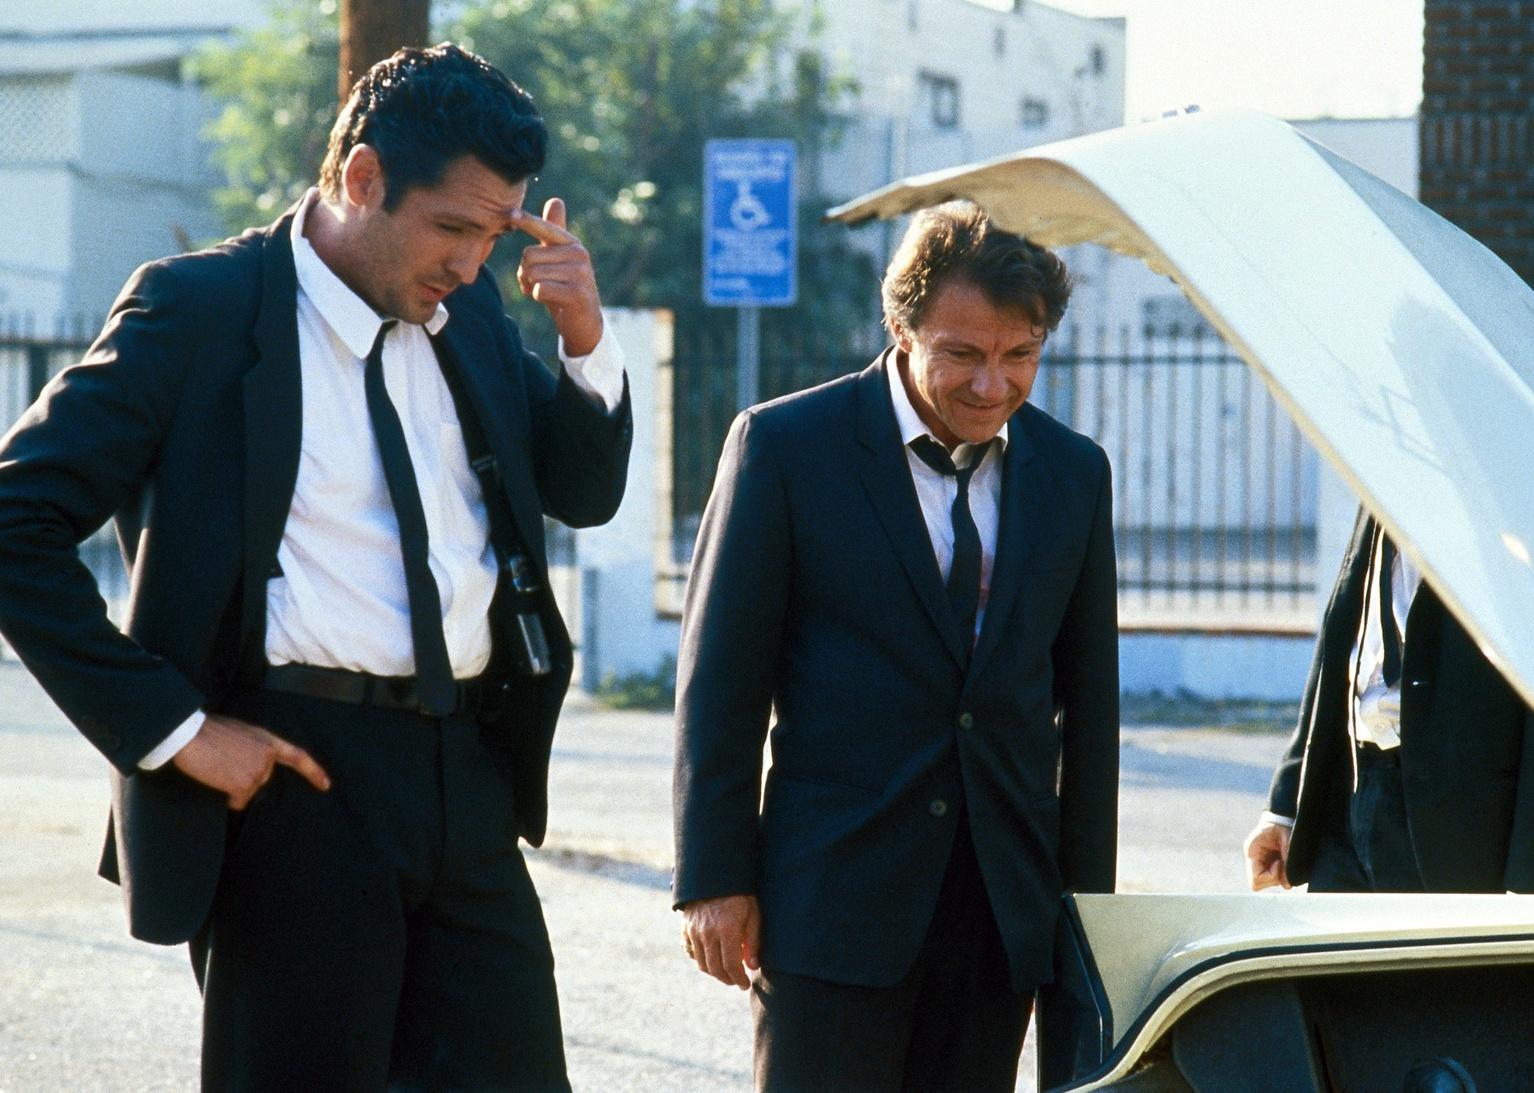 Harvey Keitel and Michael Madsen wearing black suits and looking into the trunk of a car.